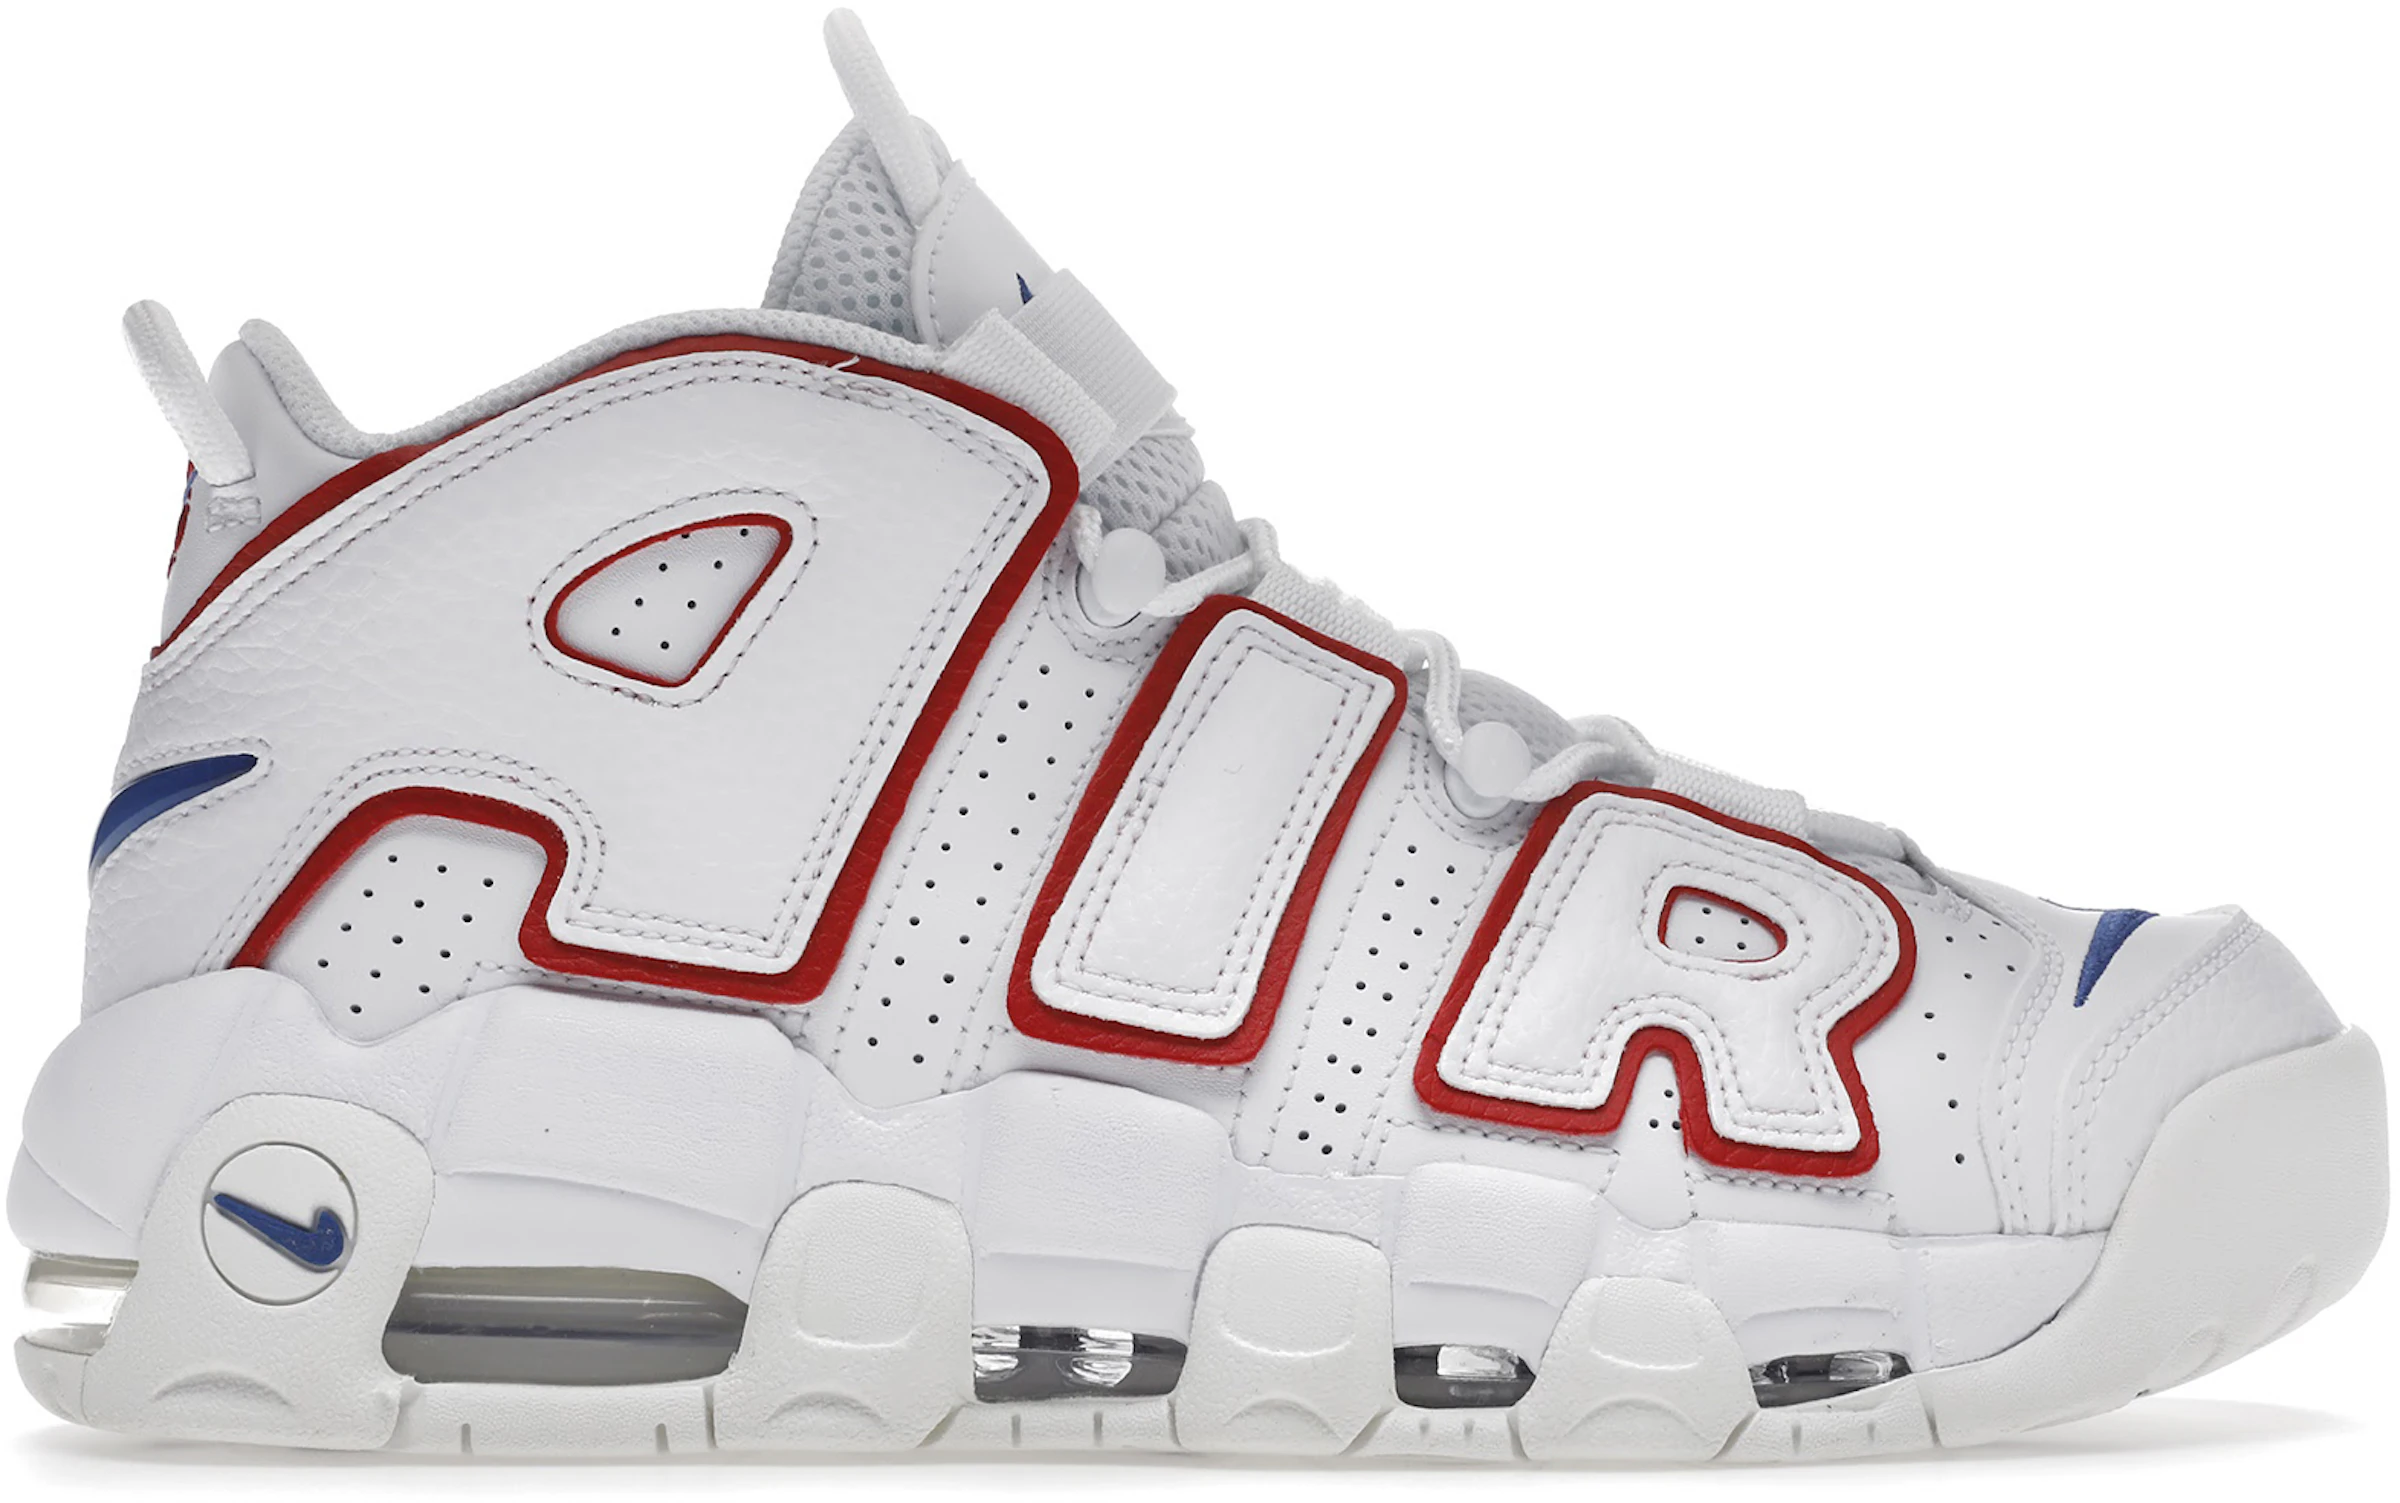 Opuesto Medicina Forense camarera Buy Nike Basketball Air Uptempo Size 8 Shoes & New Sneakers - StockX